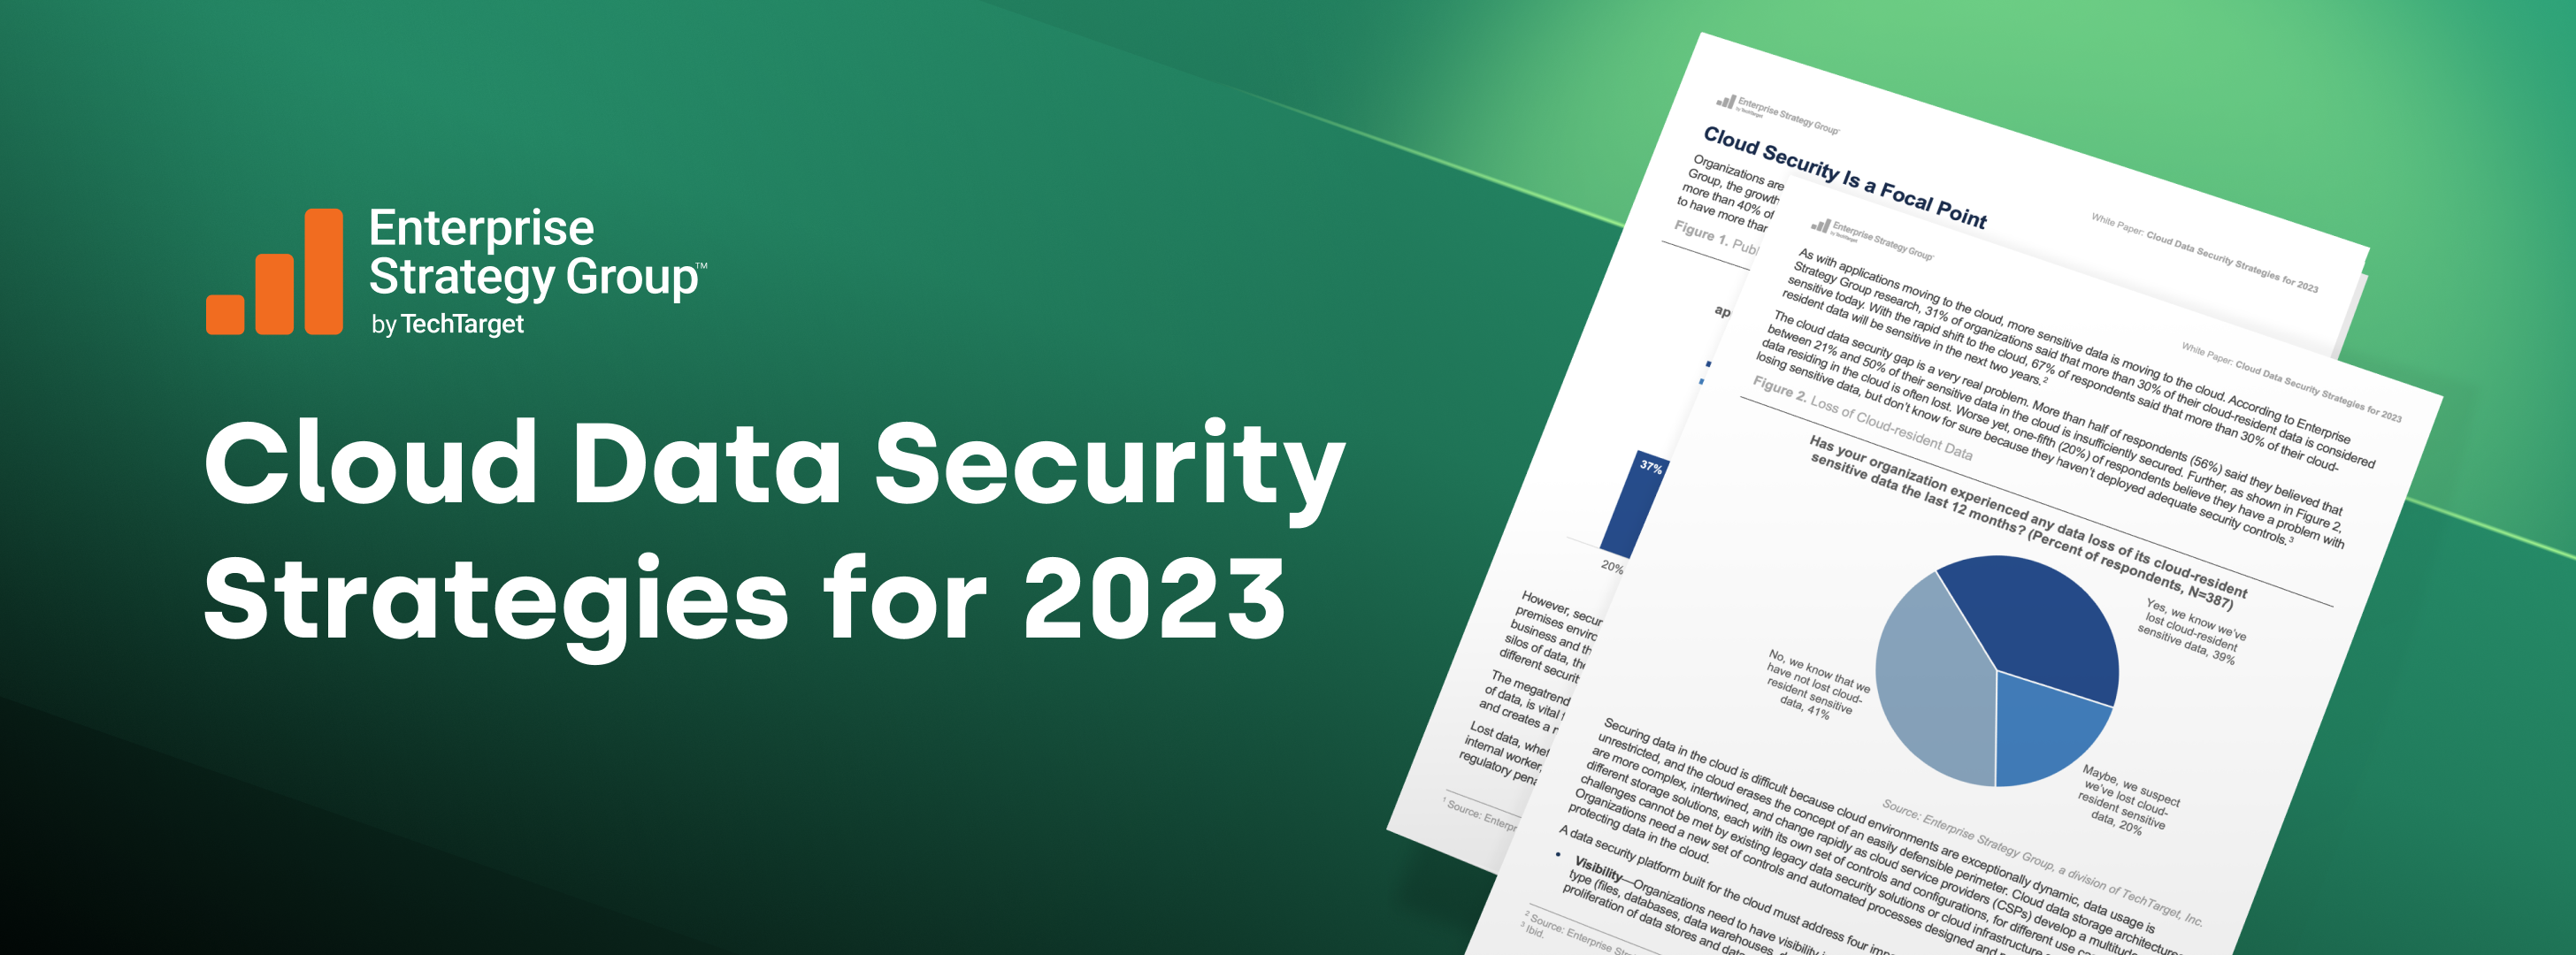 ESG White Paper: Cloud Data Security Strategies for 2023